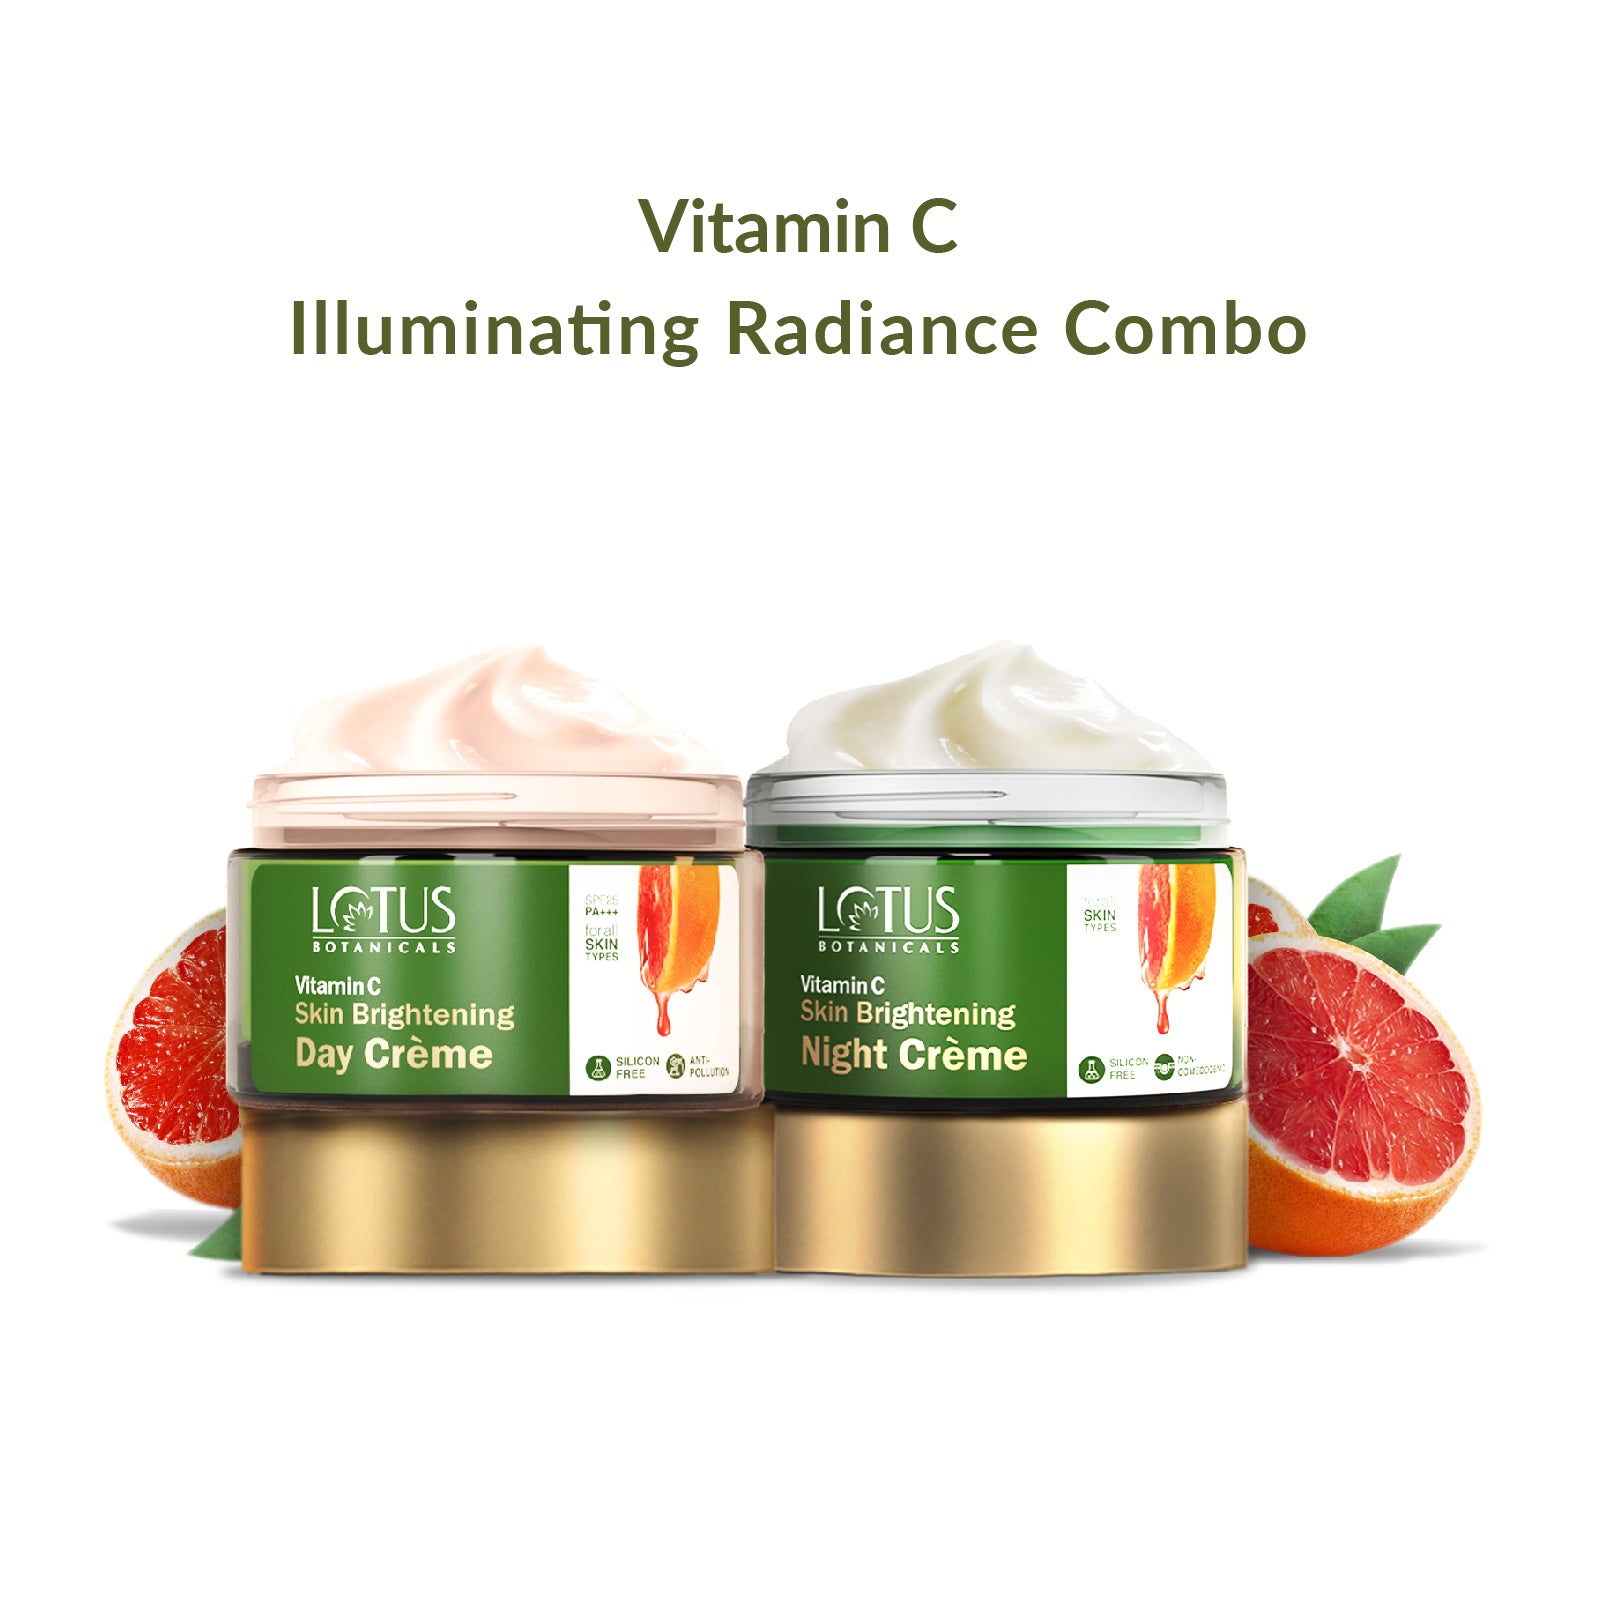 Vitamin C Illuminating Radiance Combo - Brightening skincare set with Vitamin C for a radiant and glowing complexion